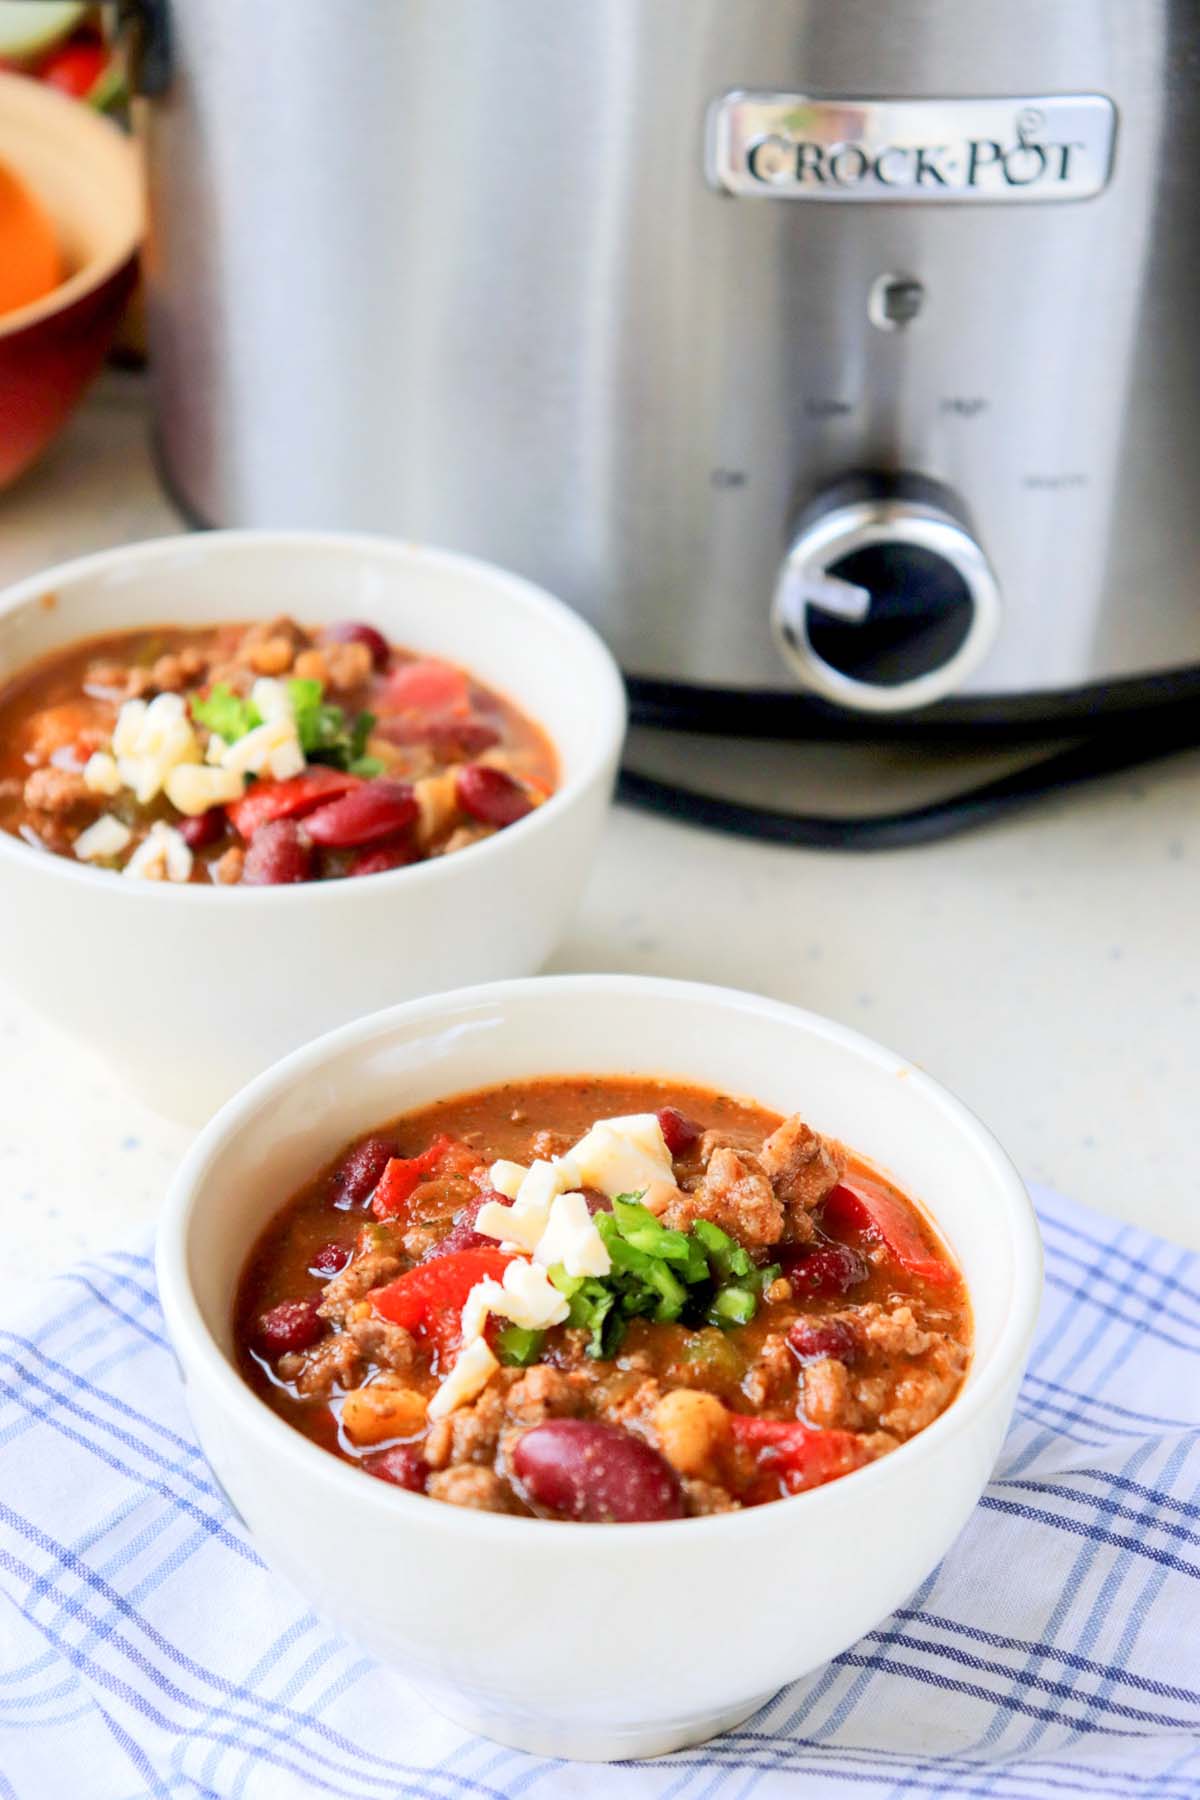 Two bowls of chili in front of the slow cooker.